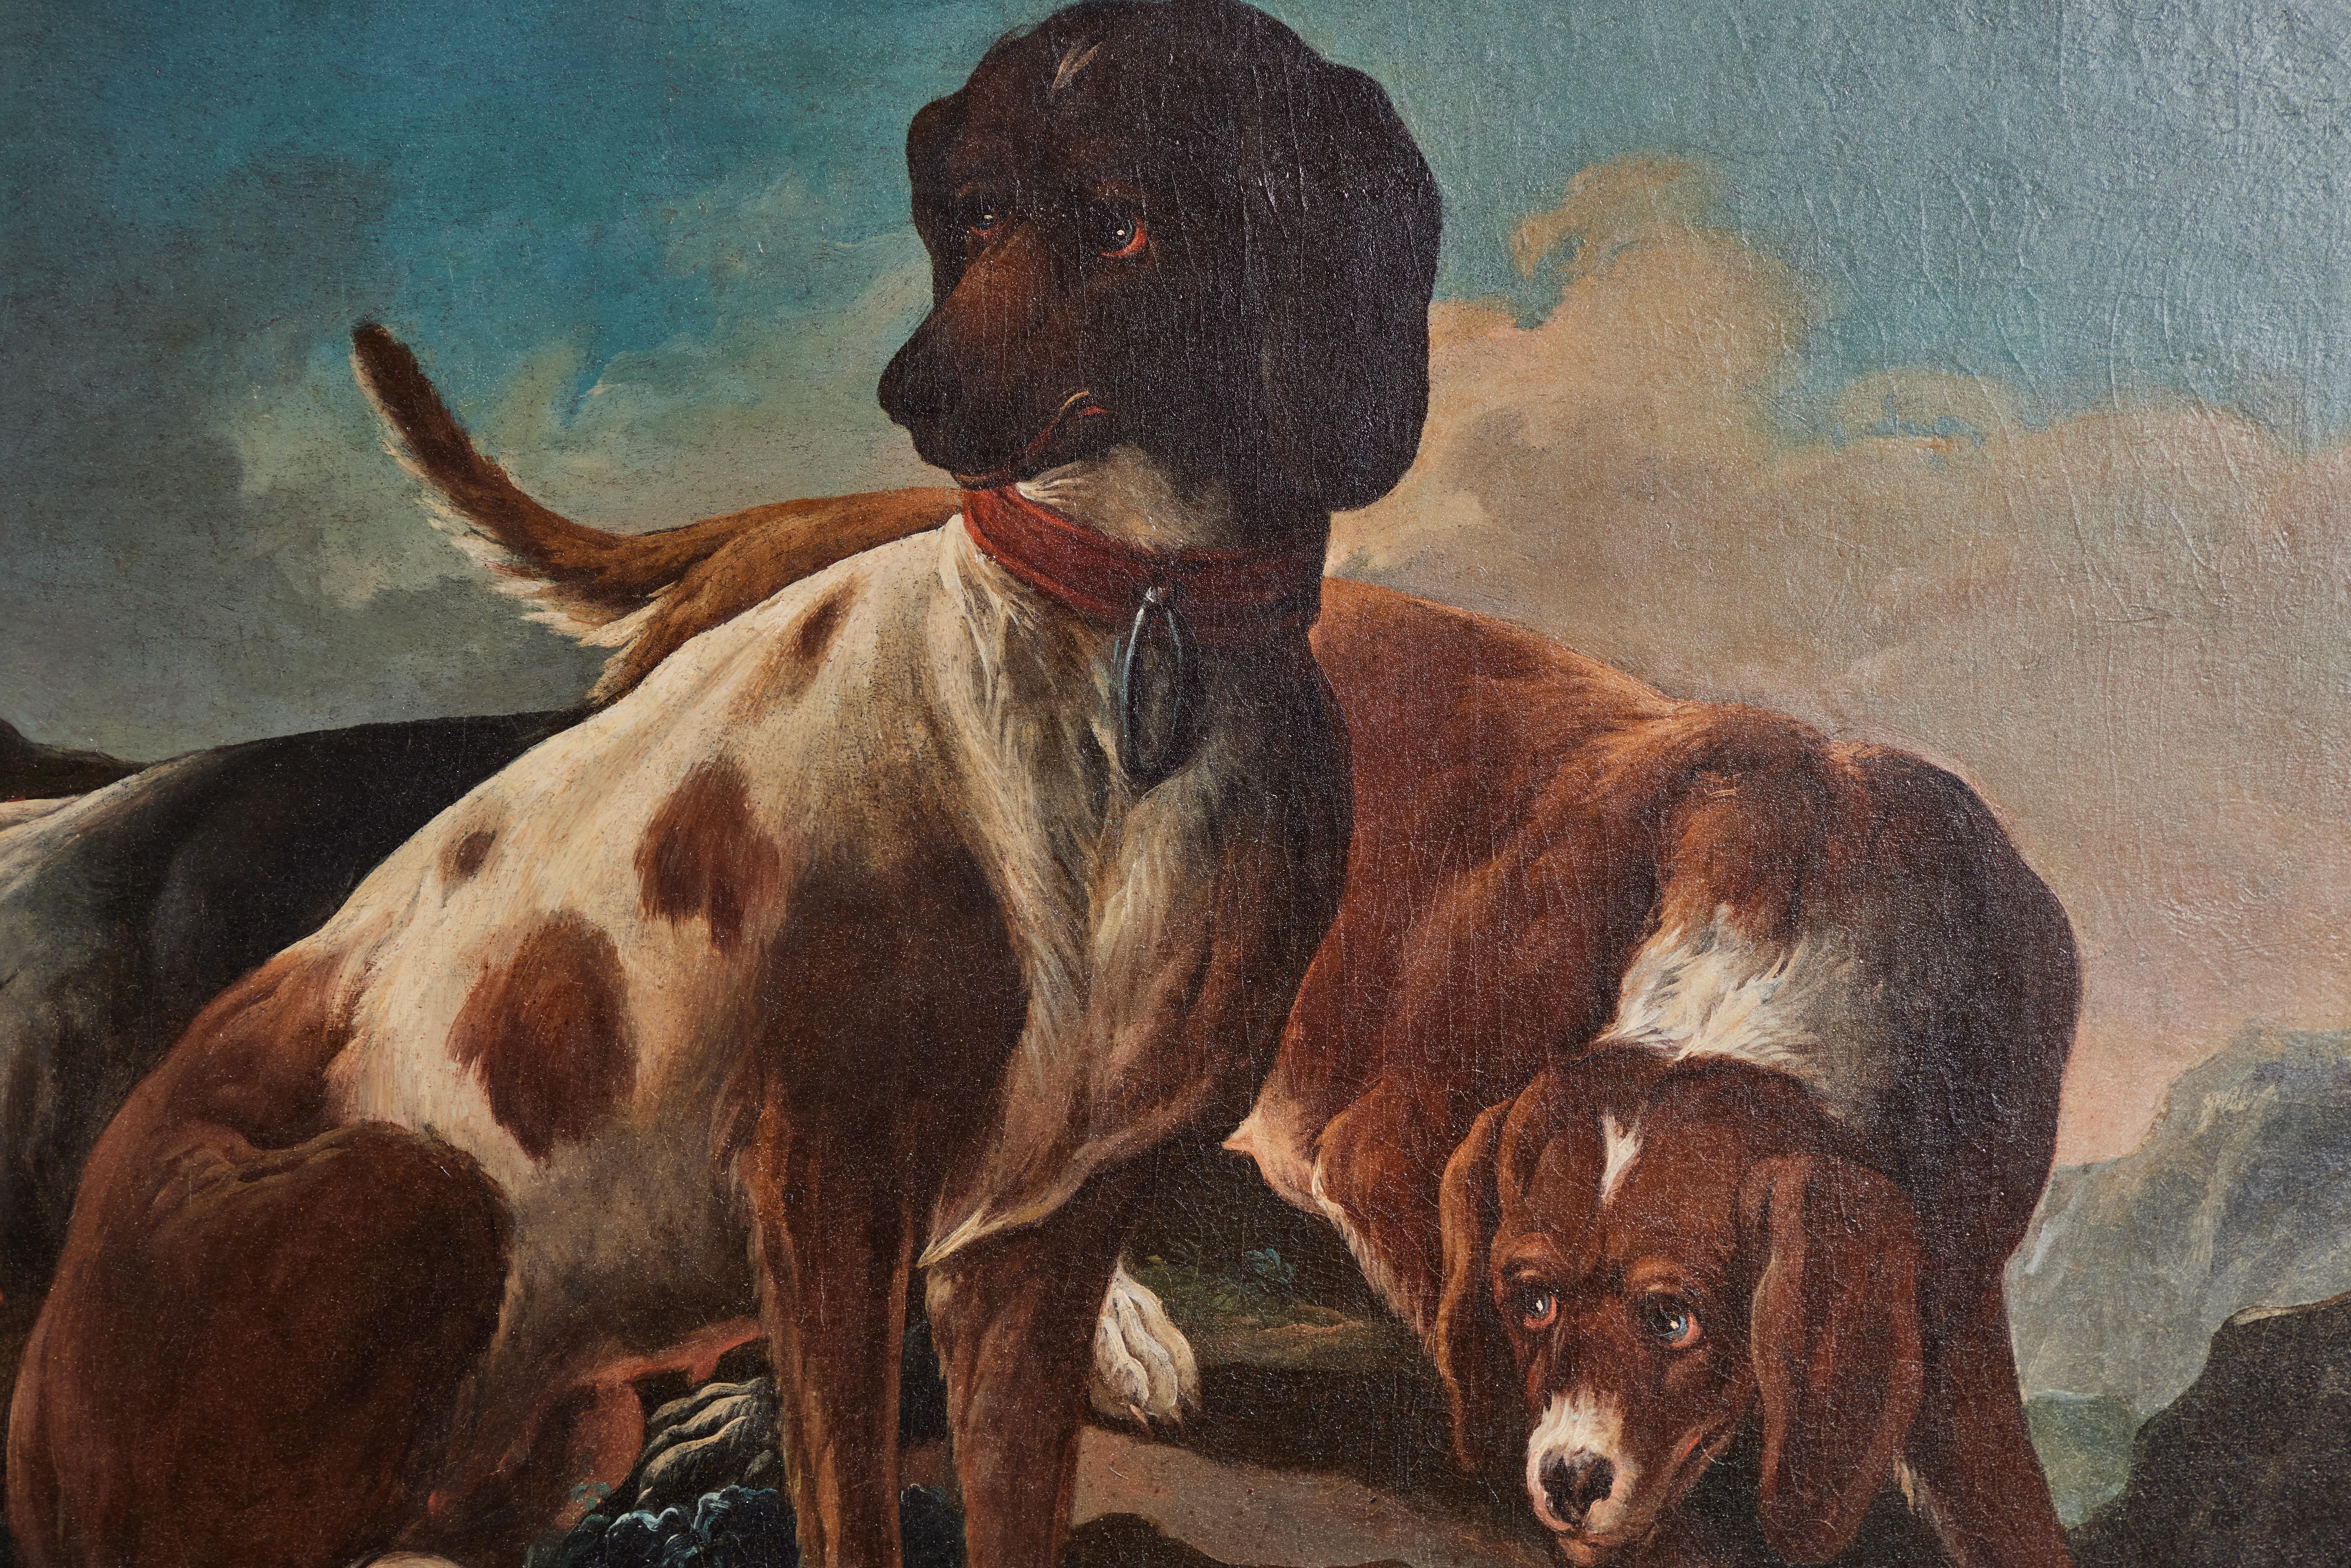 Striking, beautifully composed, c. 1740, Italian, oil-on-canvas painting of three hounds in a mountainous landscape. Soulful, slightly naive and richly detailed. Held in an antique, giltwood frame. Signed 